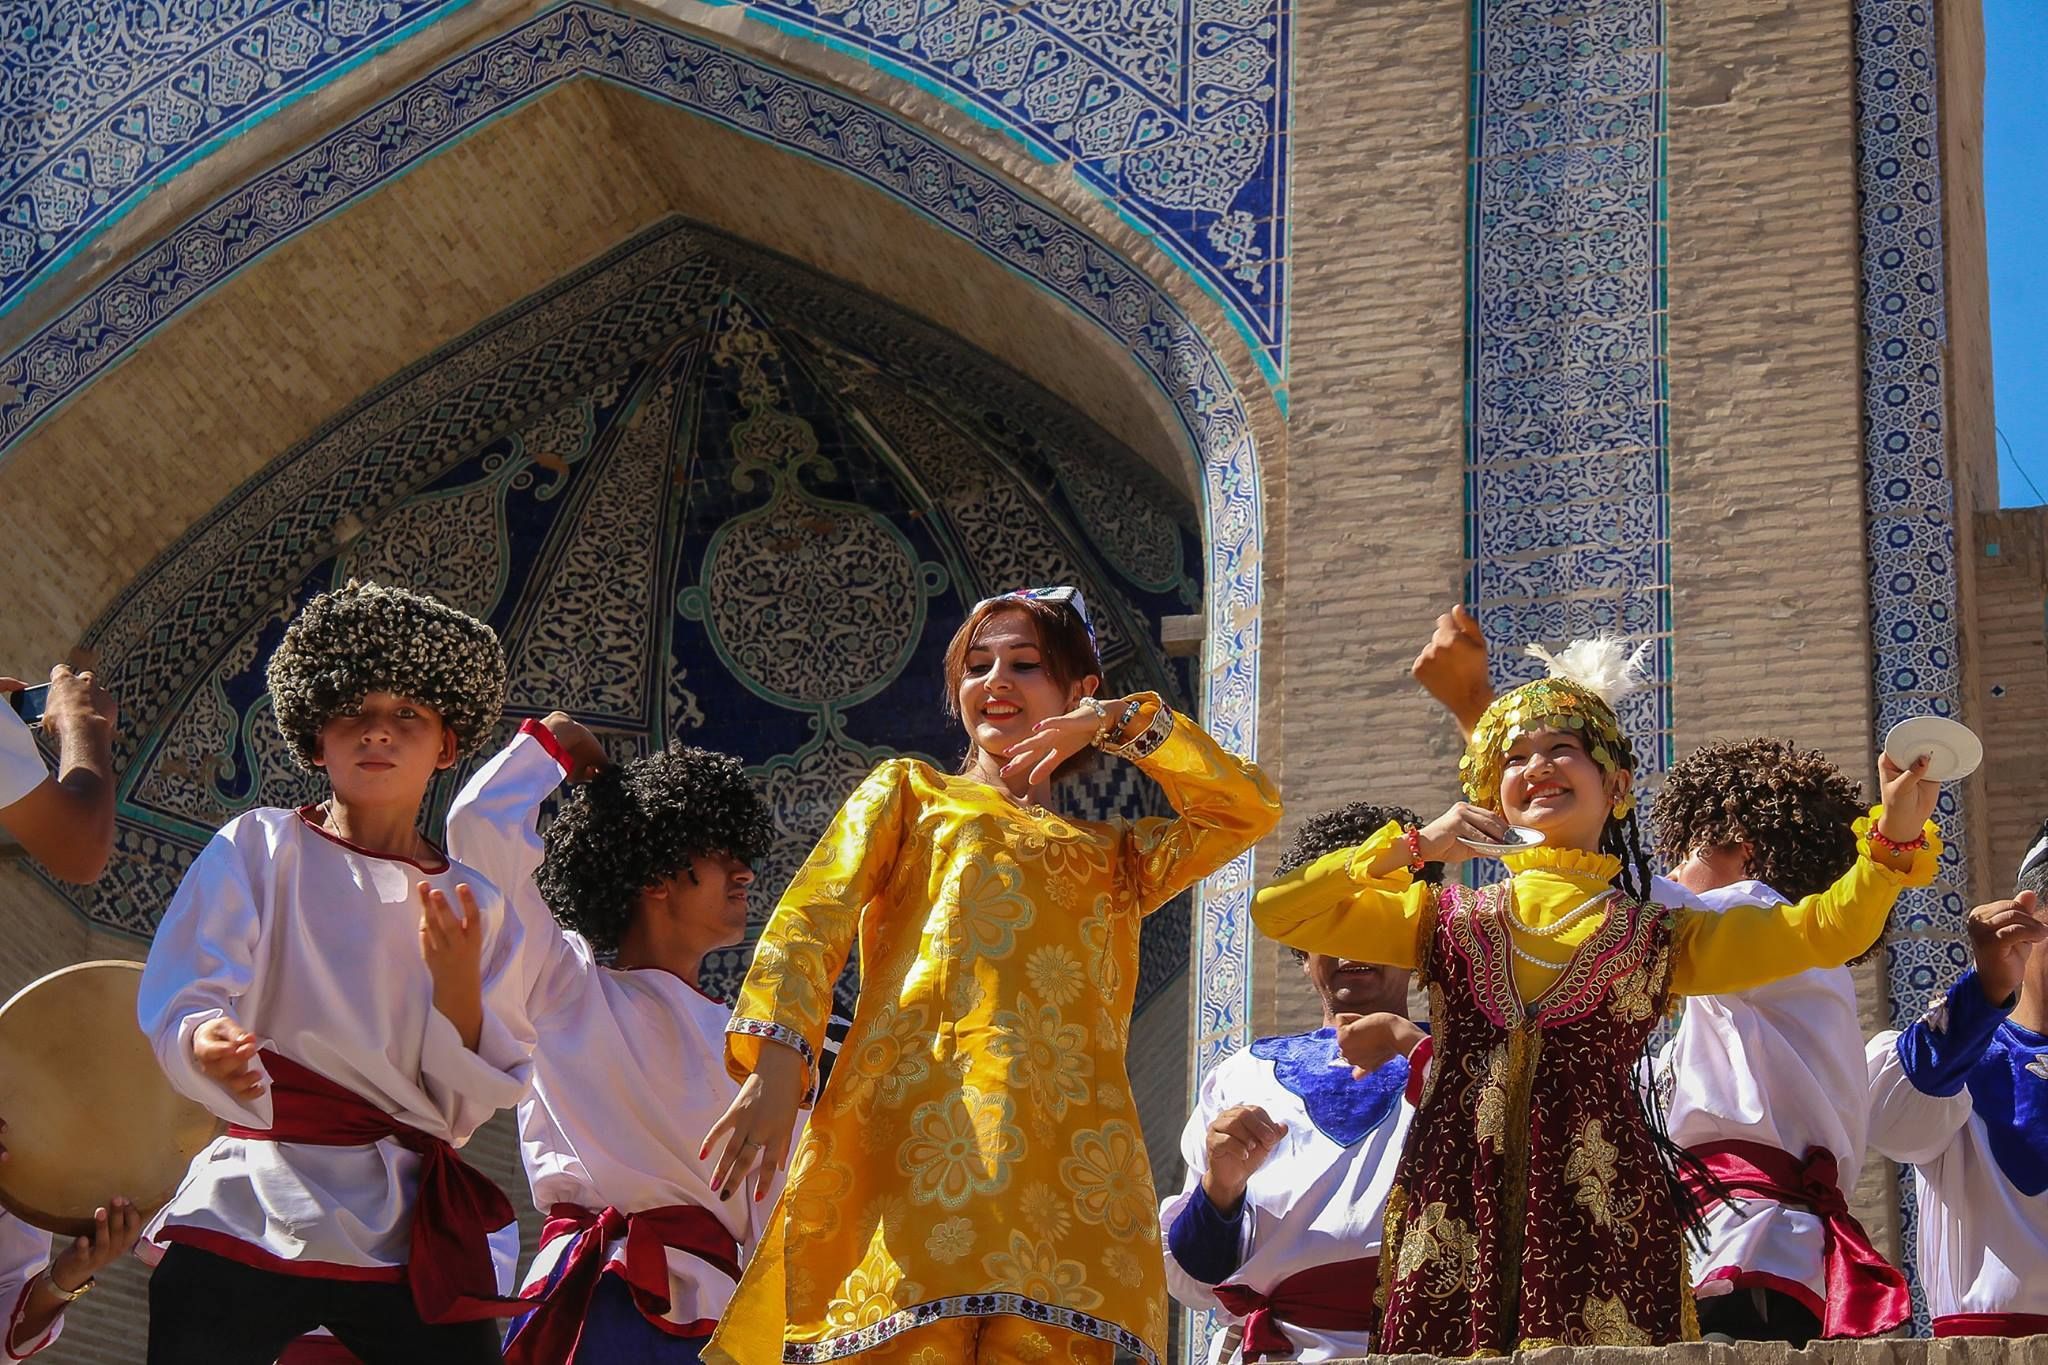 Uzbekistan sights. The most important and interesting sights of the cities of Uzbekistan.